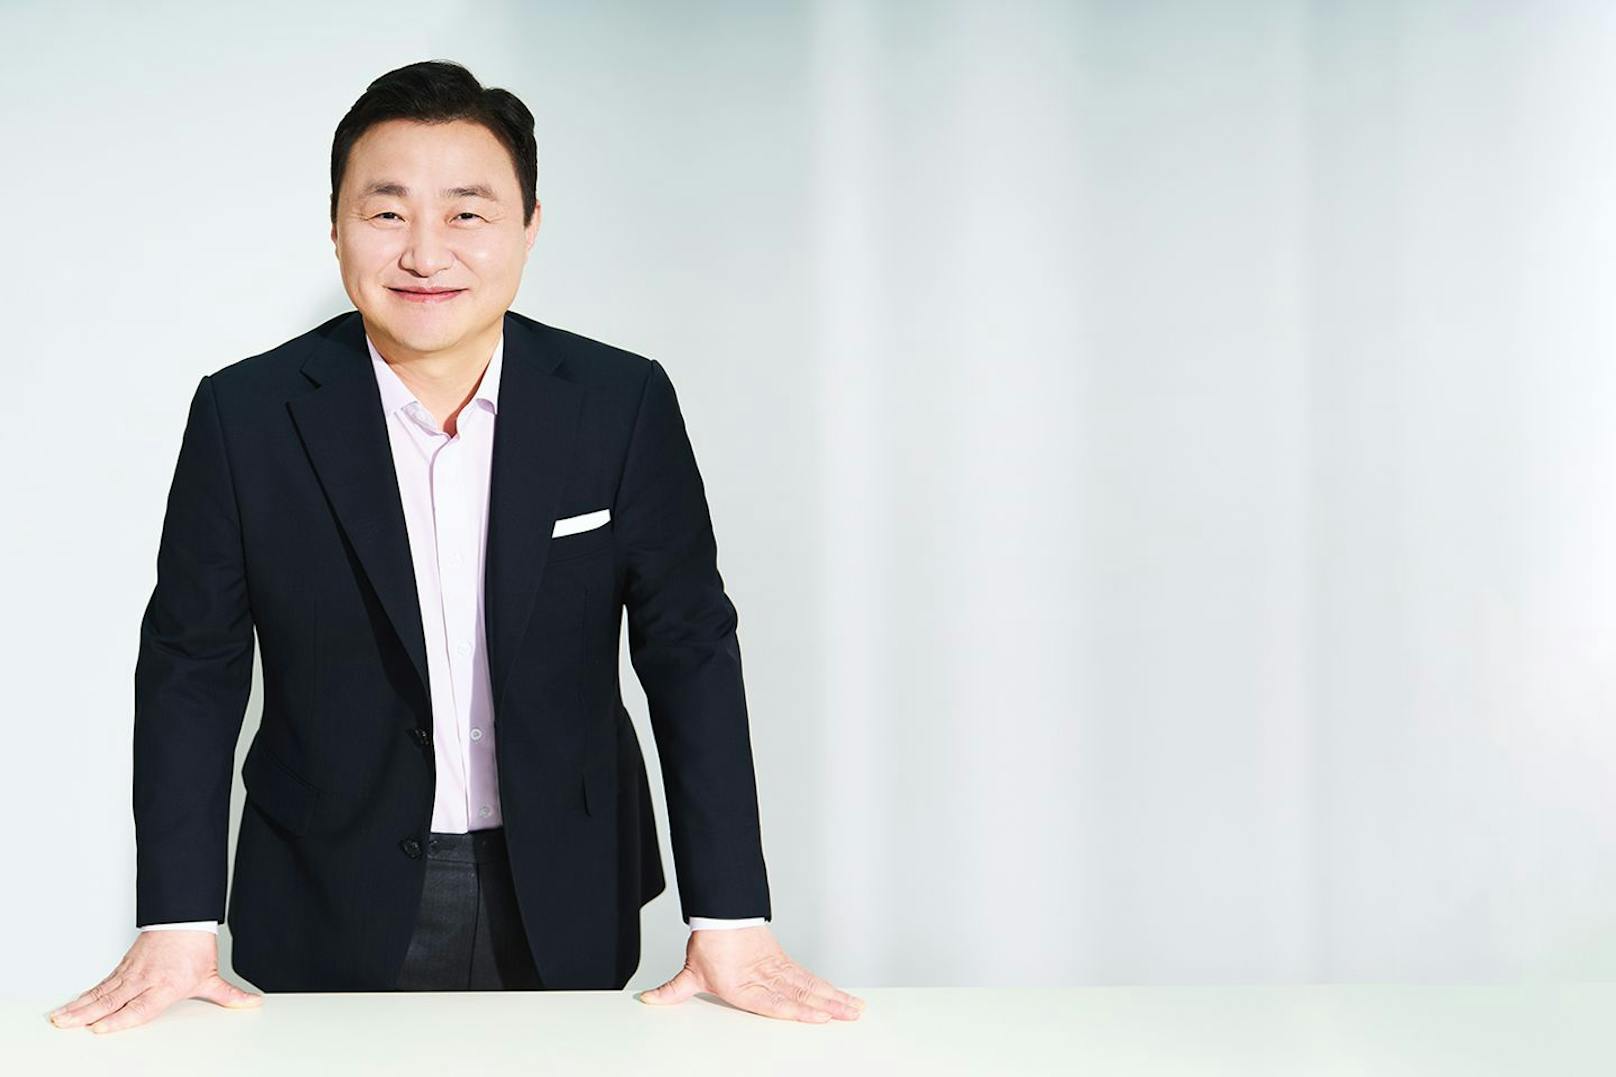 Tae Moon Roh, President & Head of MX Business, Samsung Electronics.